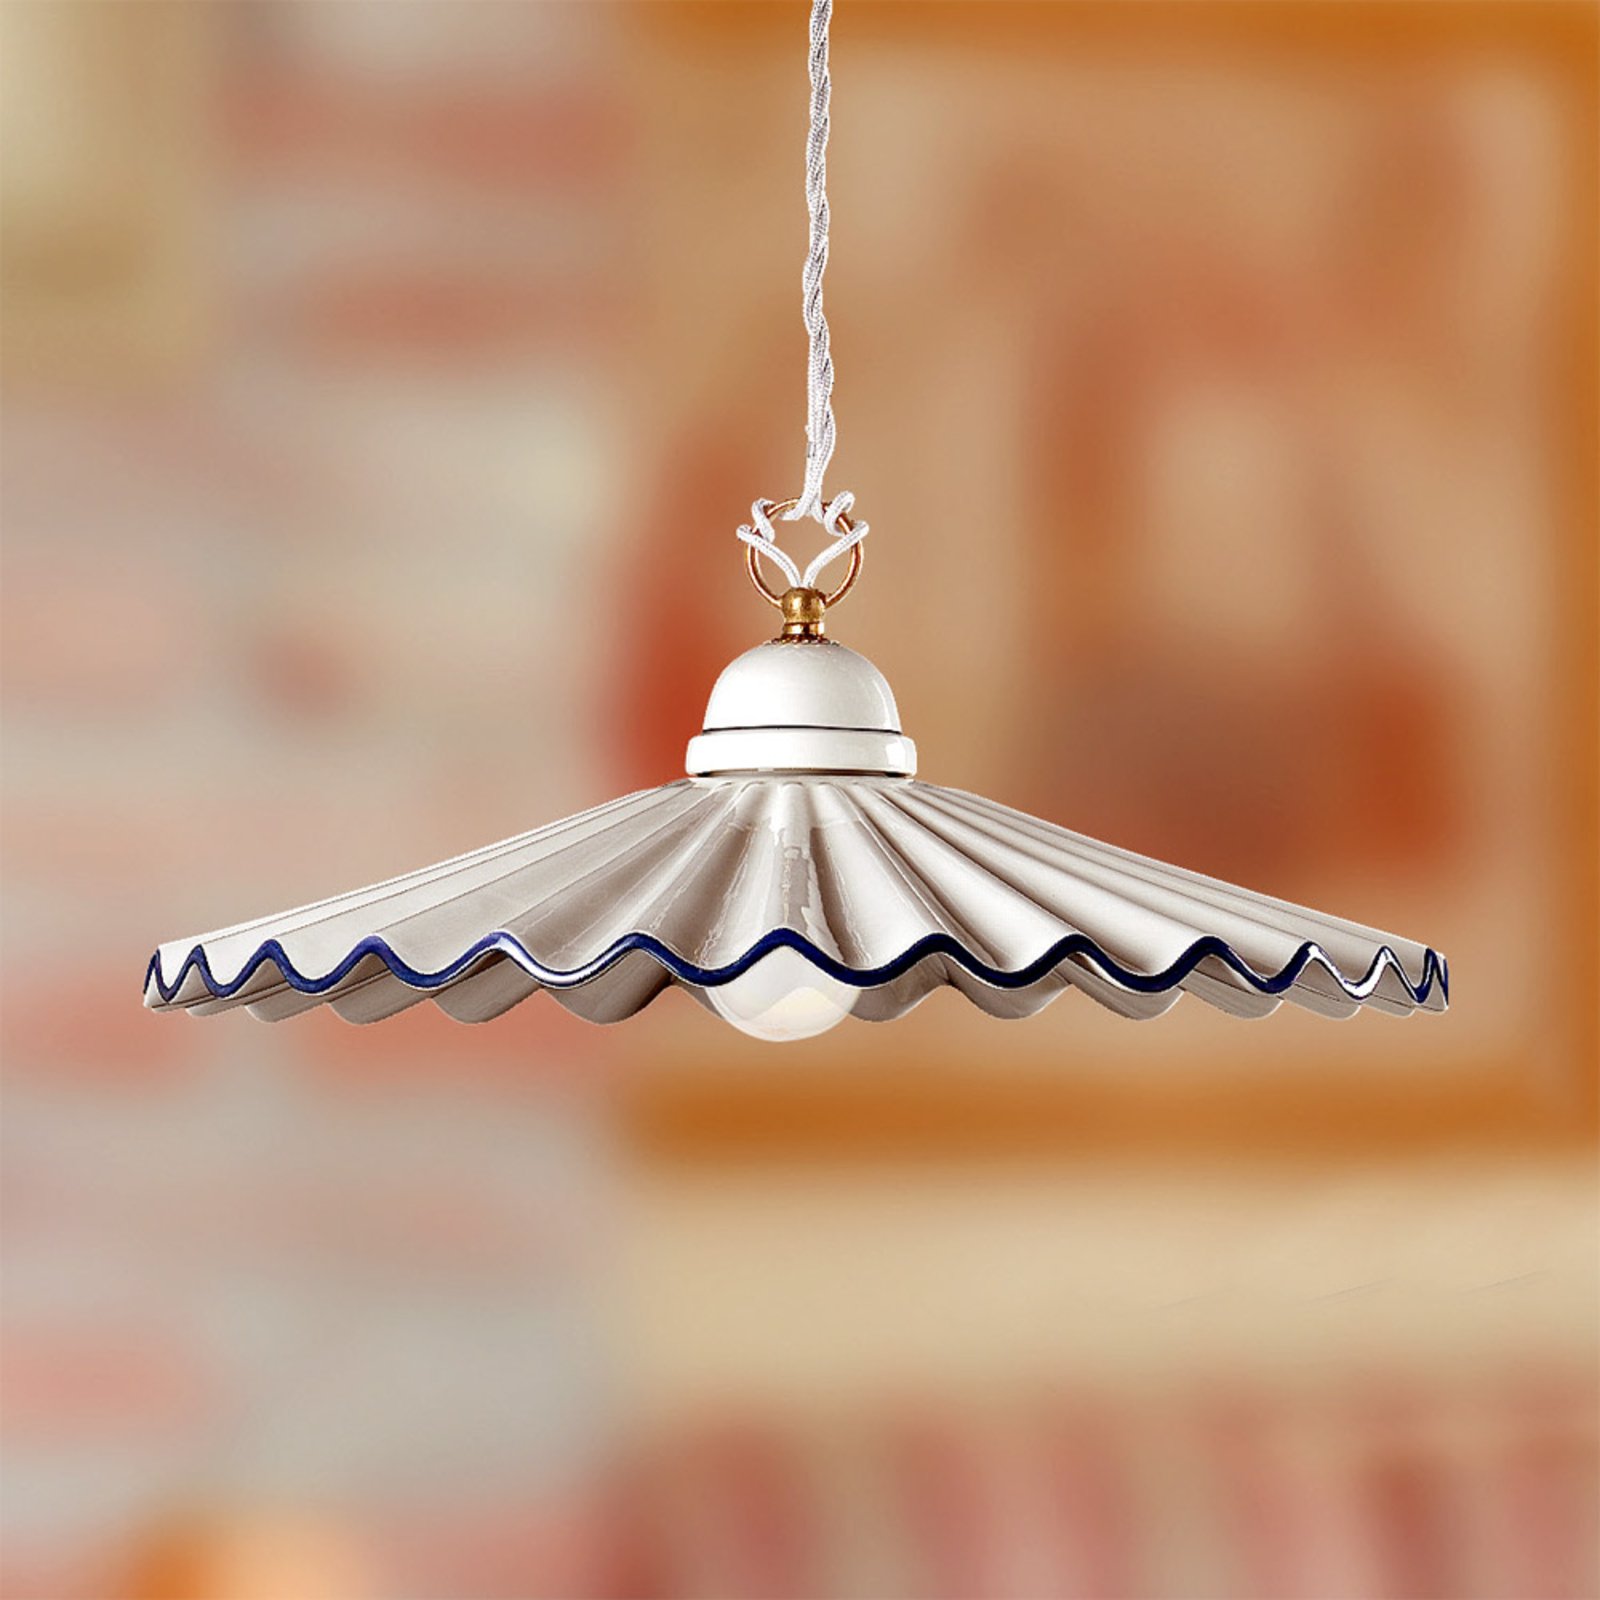 Rise and fall pendant light PIEGHE